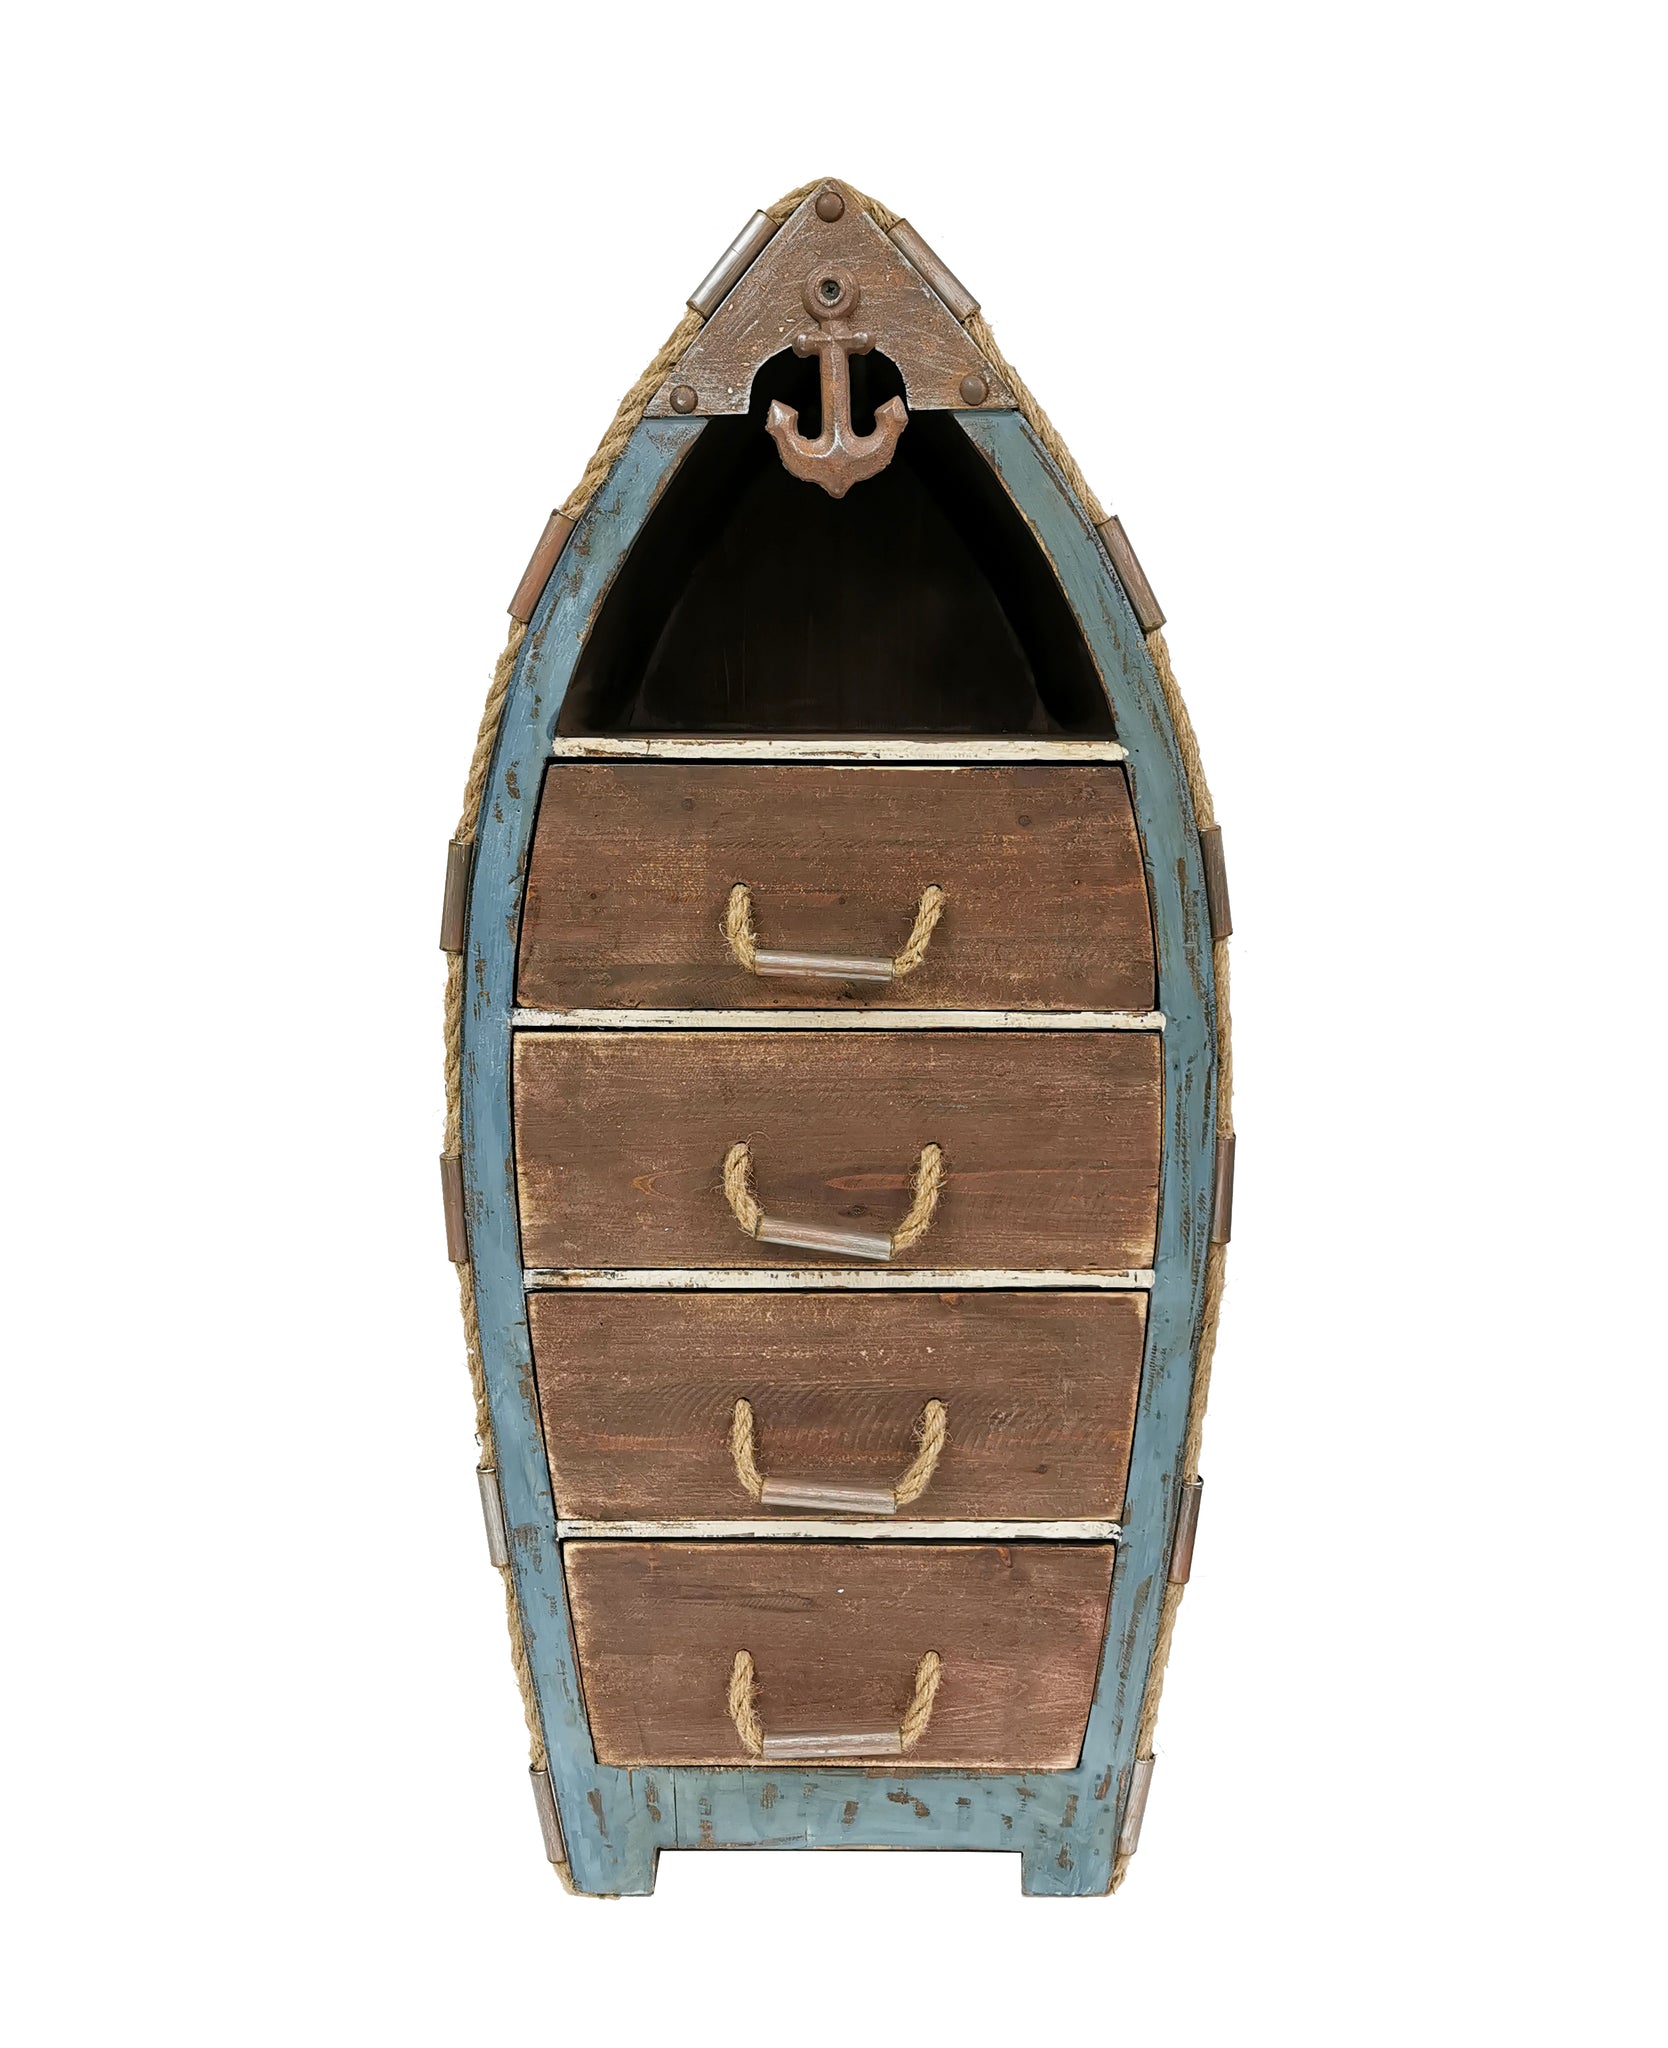 Solid wood boat shaped cabinet with drawers - Peterson Housewares & Artwares